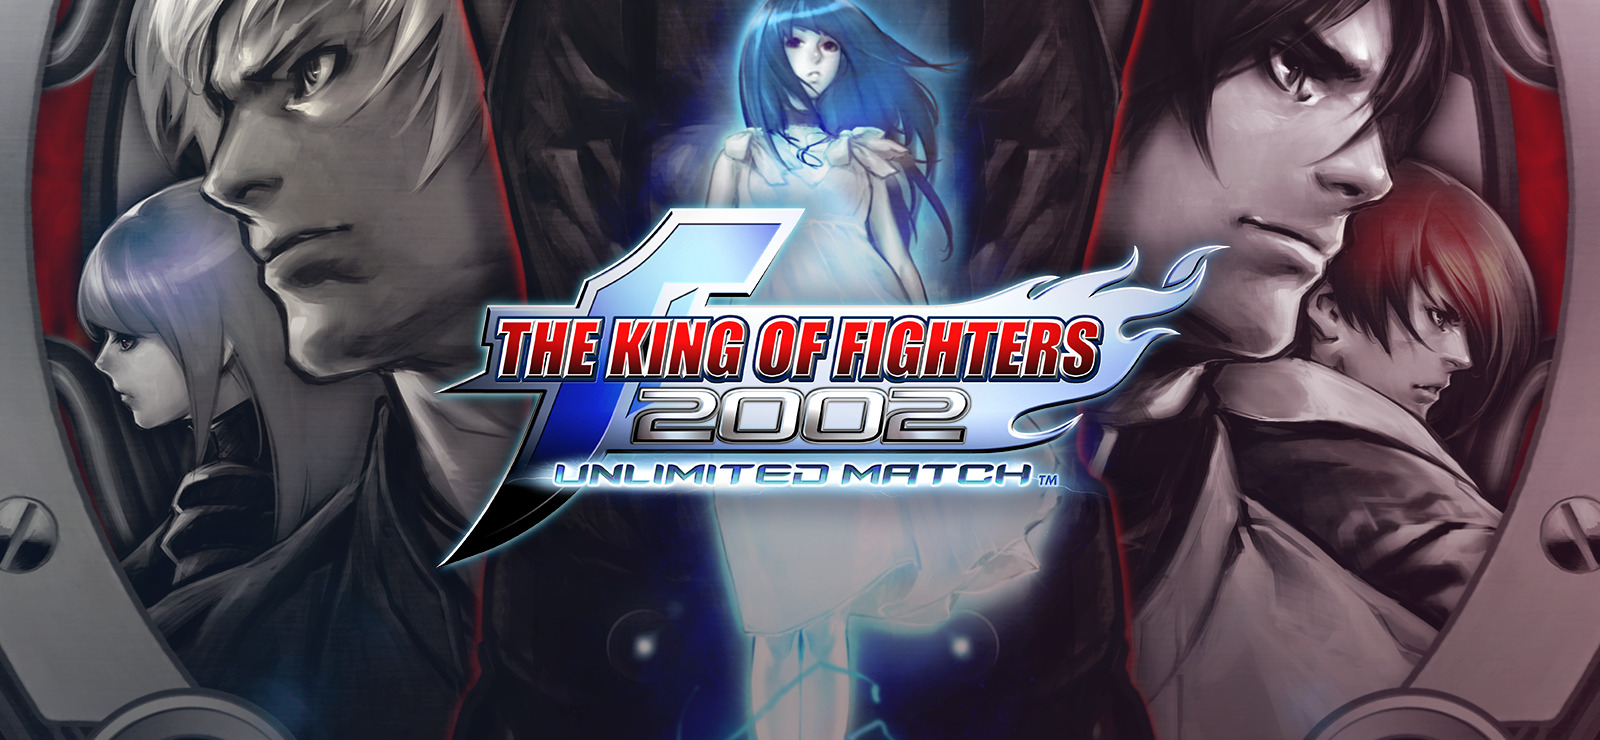 How to Download THE KING OF FIGHTERS 2002 for Android if you have any